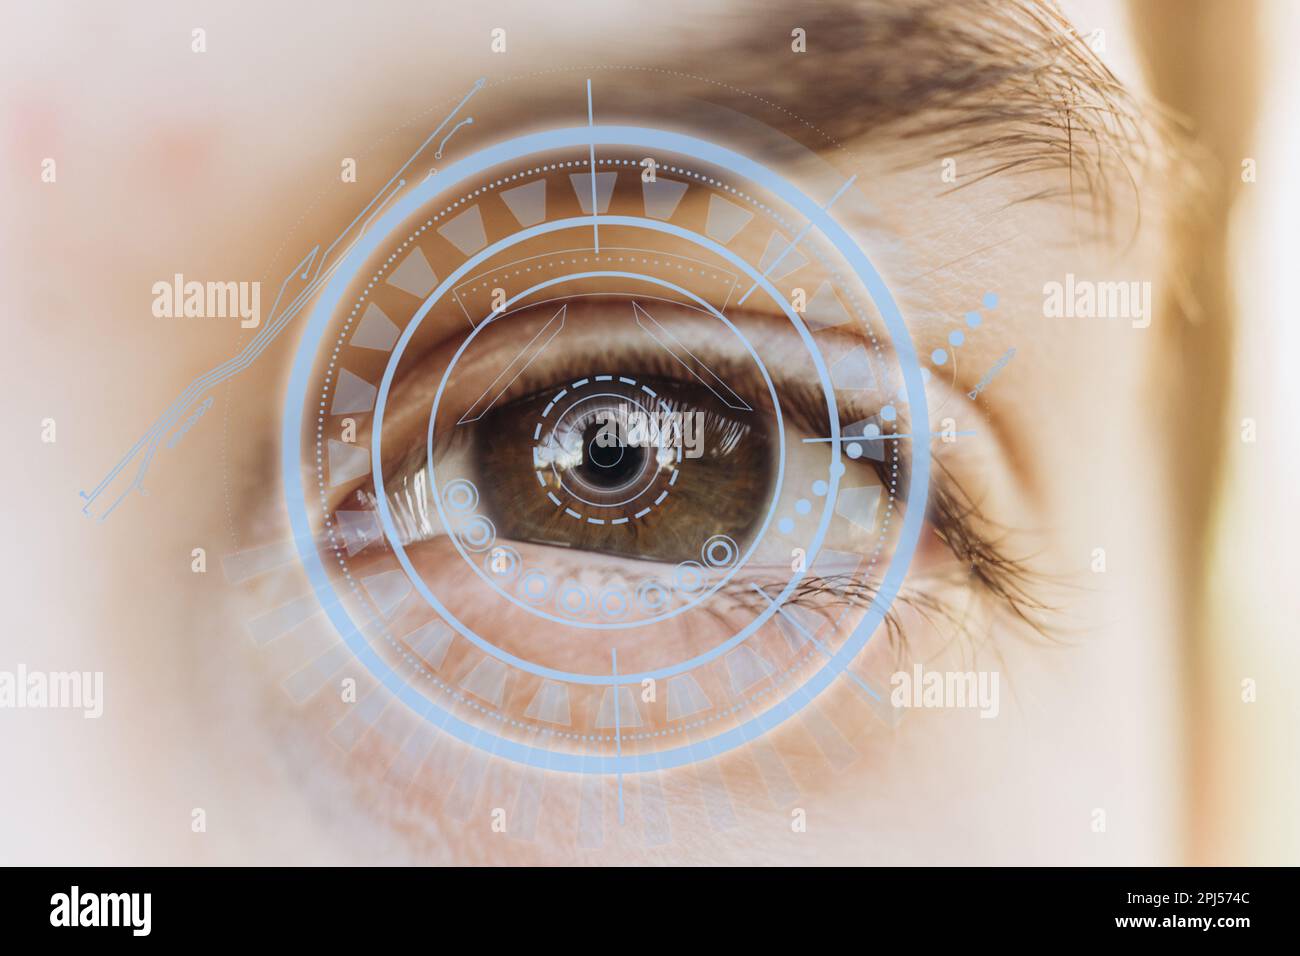 Eye with a futuristic vision of a person, control and protection of people, access control and security. Concept: DNA system, science and technology Stock Photo